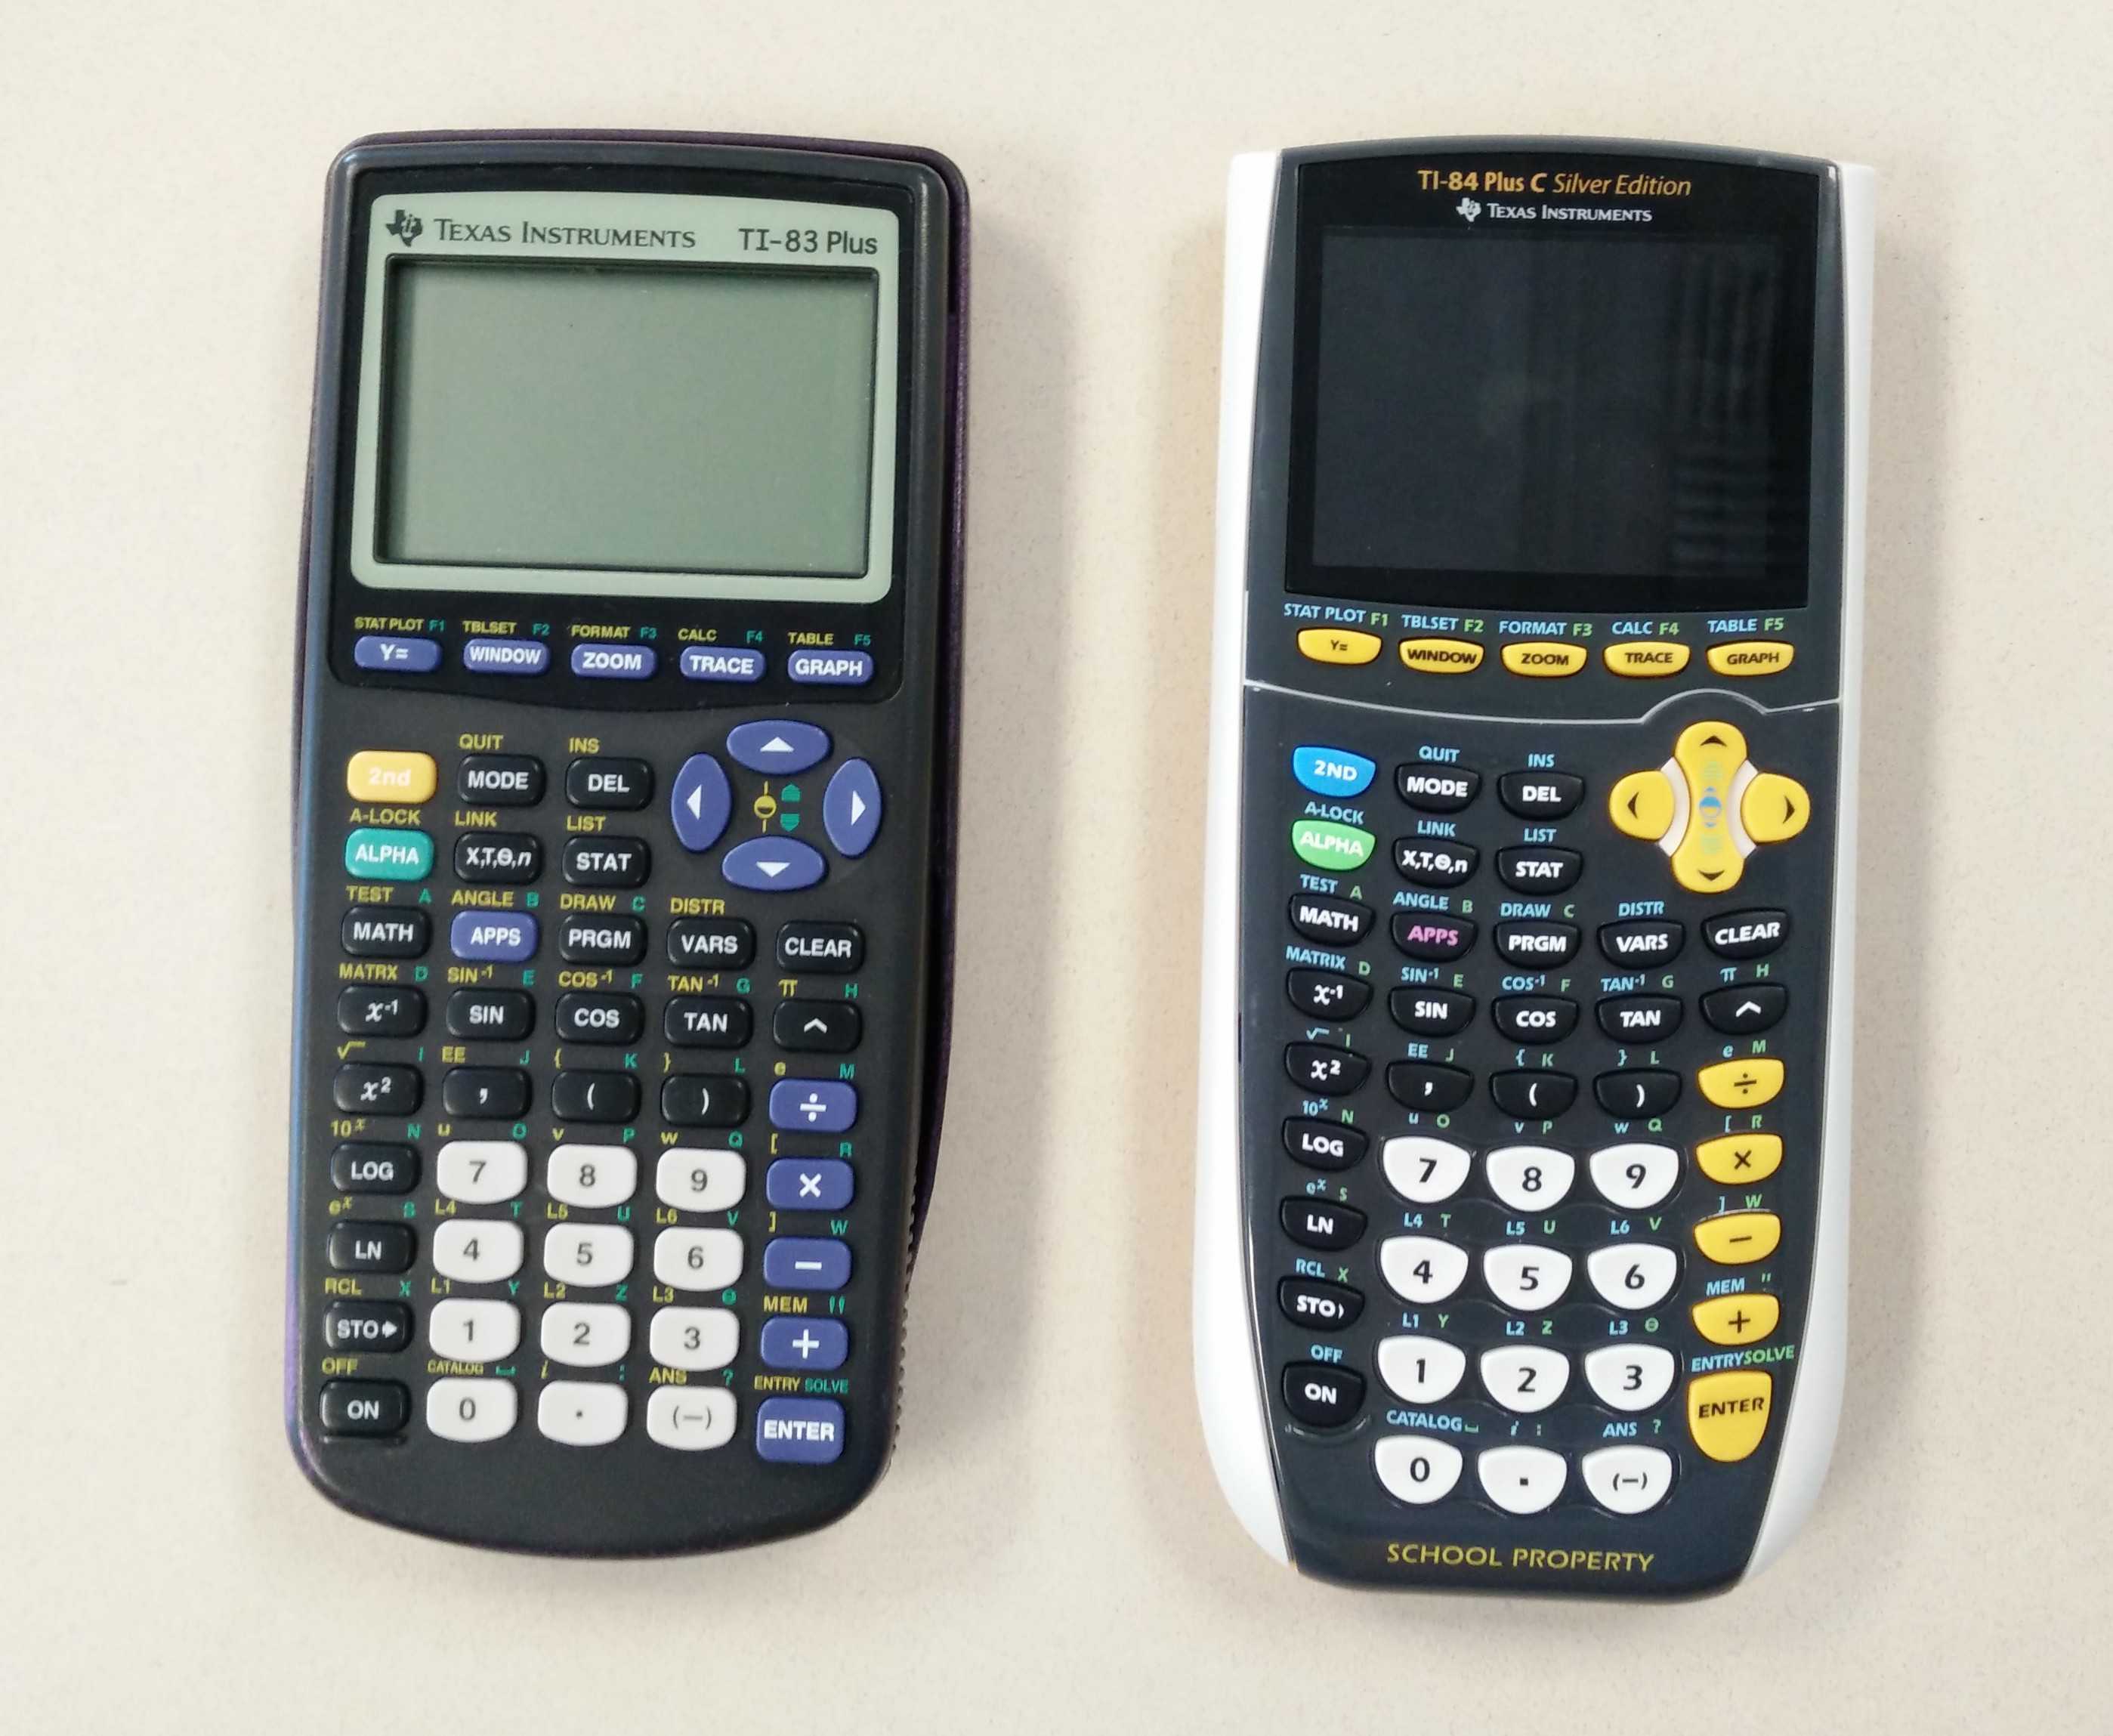 A comparison between the original TI-83 Plus and the new TI-84 Plus. The revamped calculators have colored displays and rechargeable batteries.